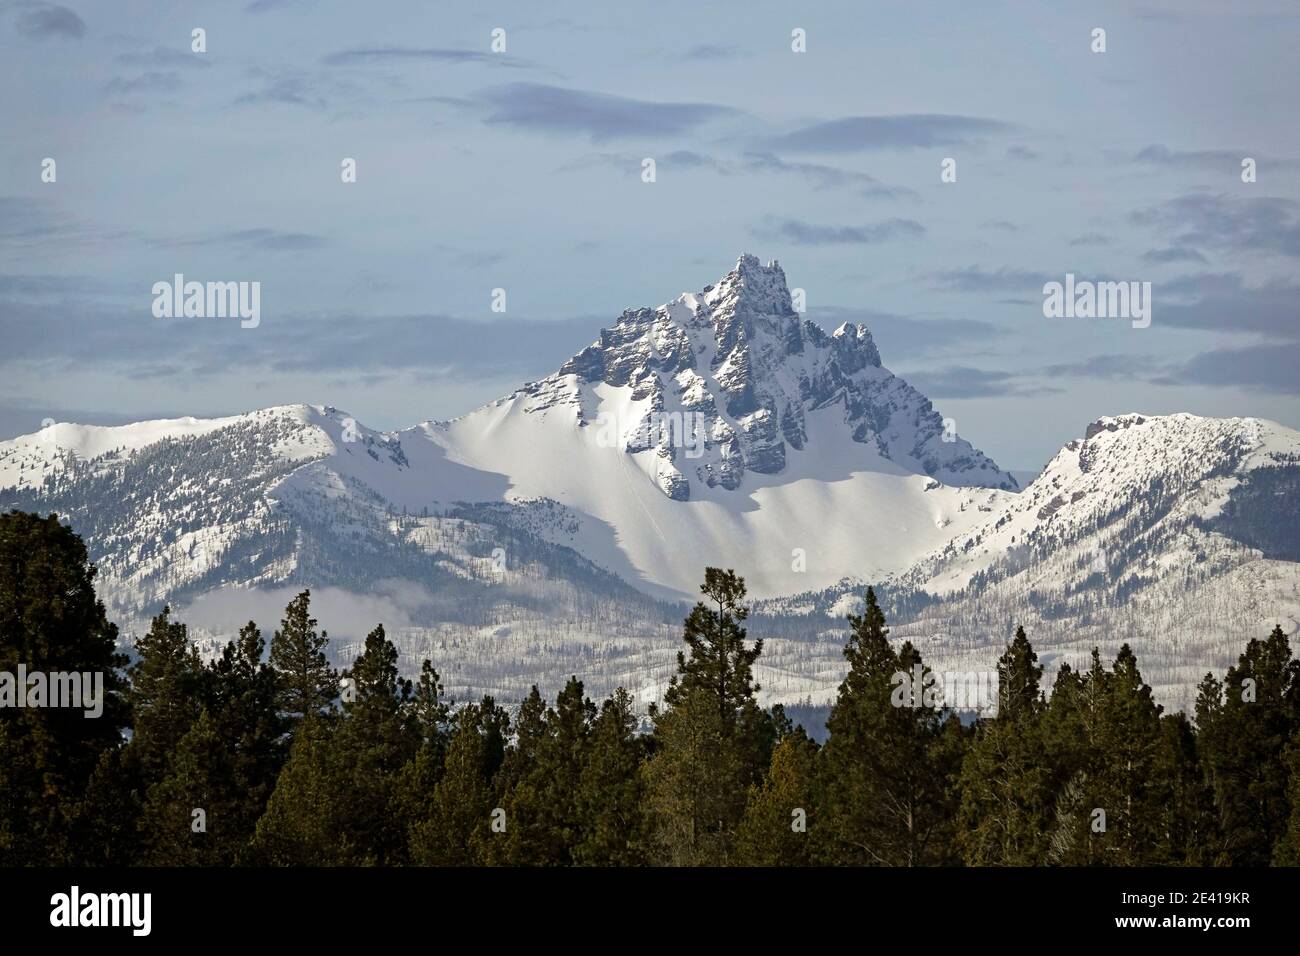 A view of Three-Fingered Jack peak in the Oregon Cascade Mountains, in winter. Stock Photo